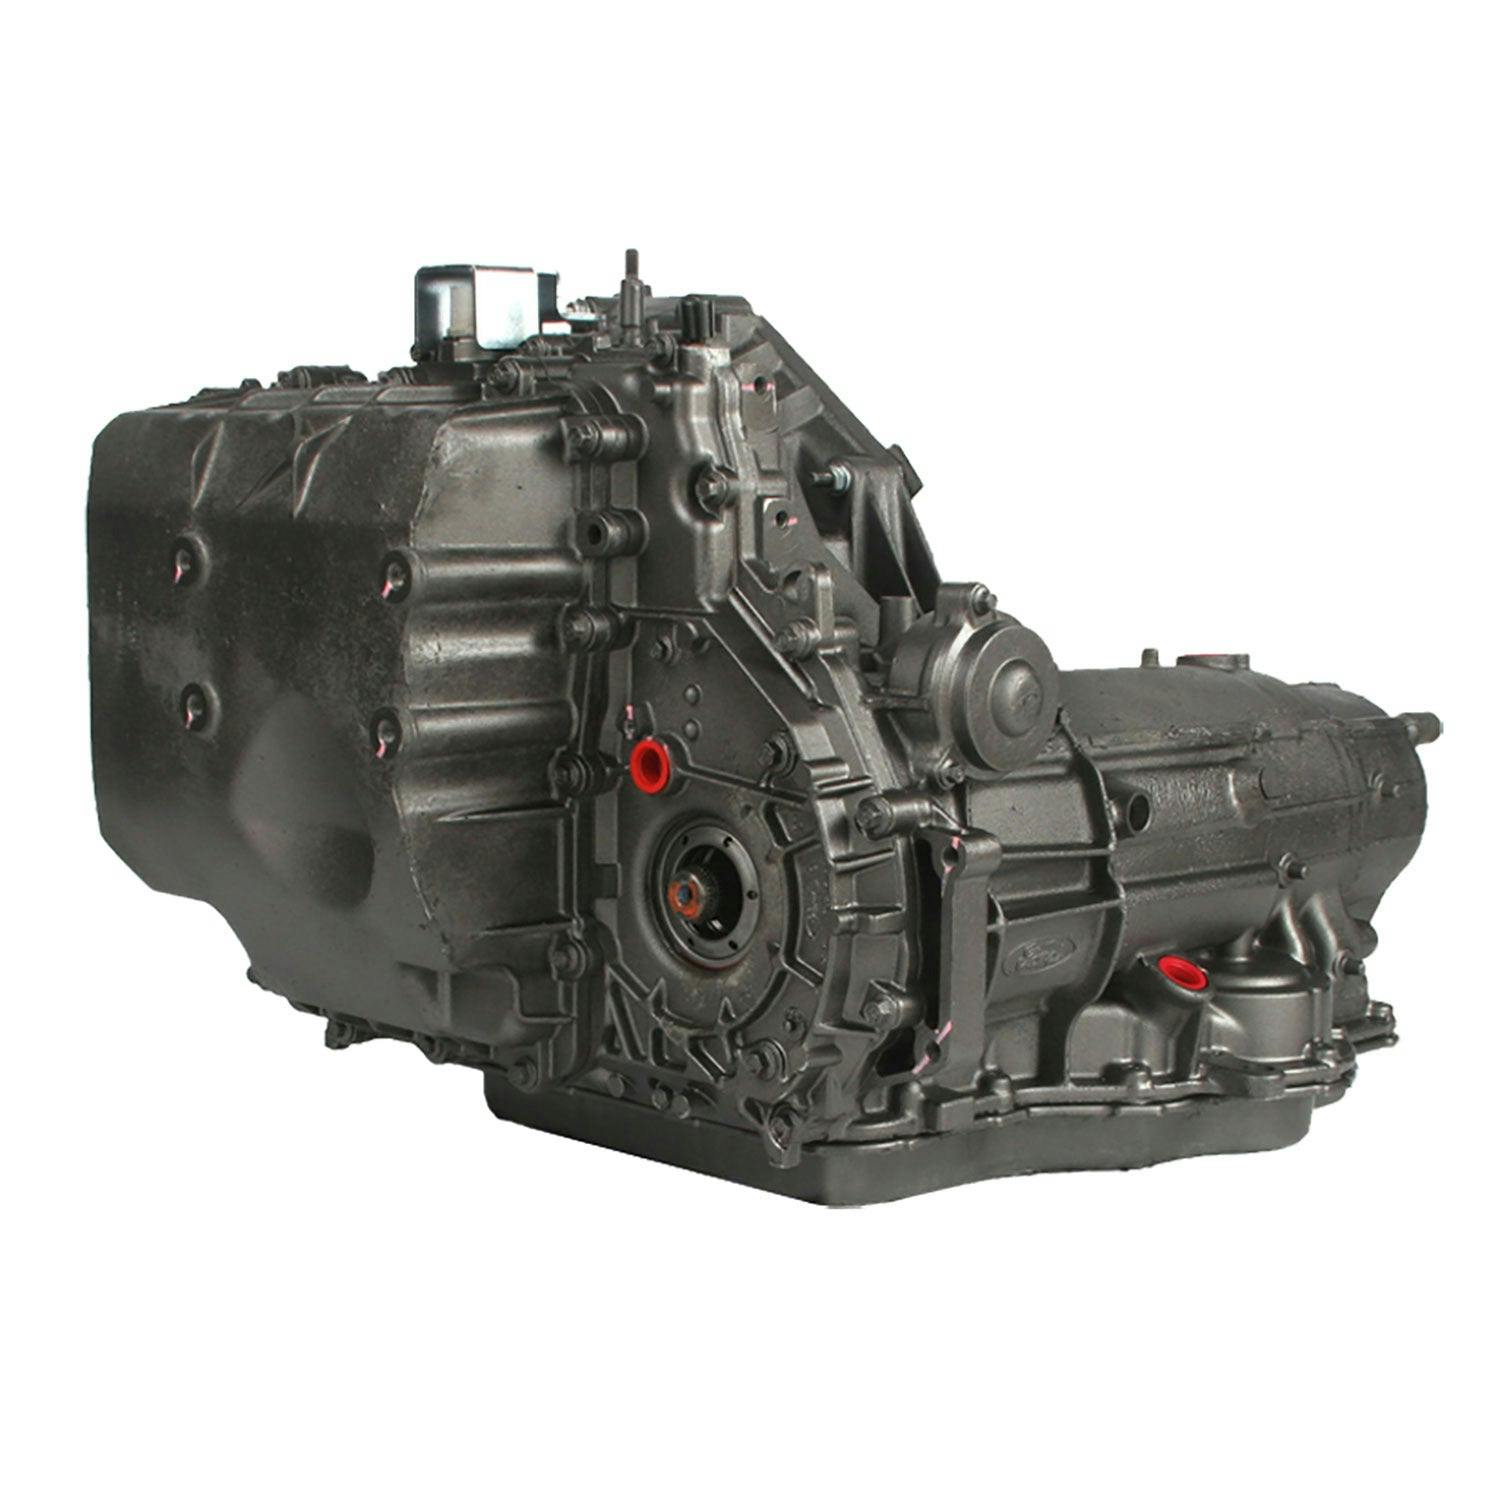 Automatic Transmission for 1996-1997 Ford Taurus FWD with 3.4L V8 Engine